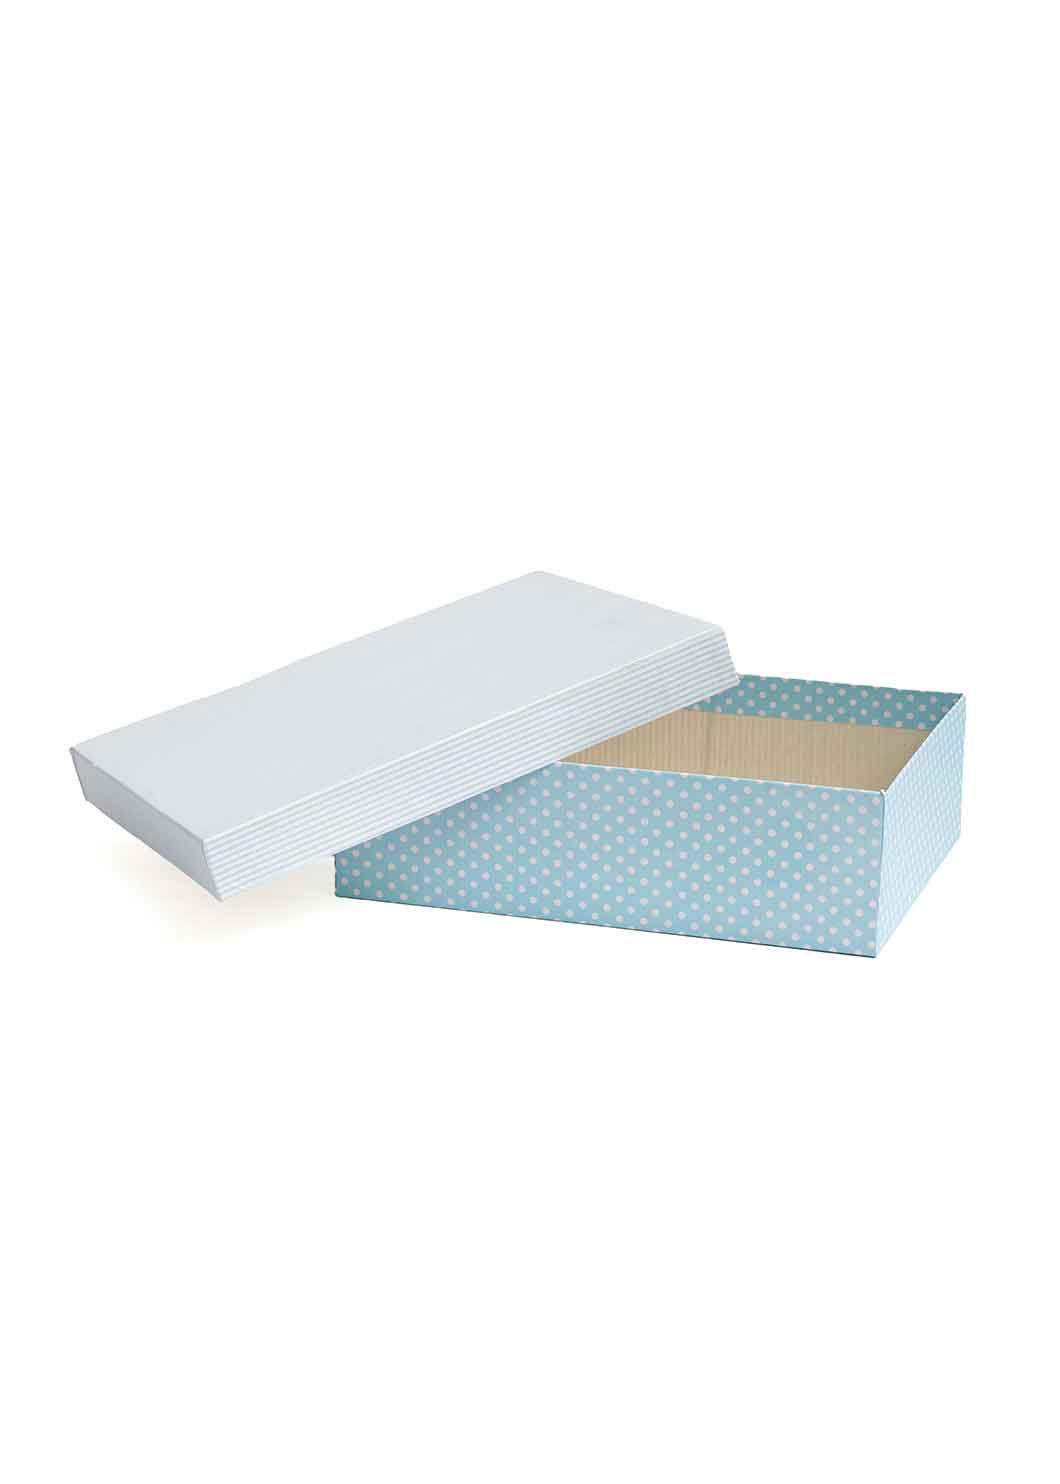 Dotted Base With Line Cover Gift Packing Box - 2 Colors 14x11 in Gift Packaging Box